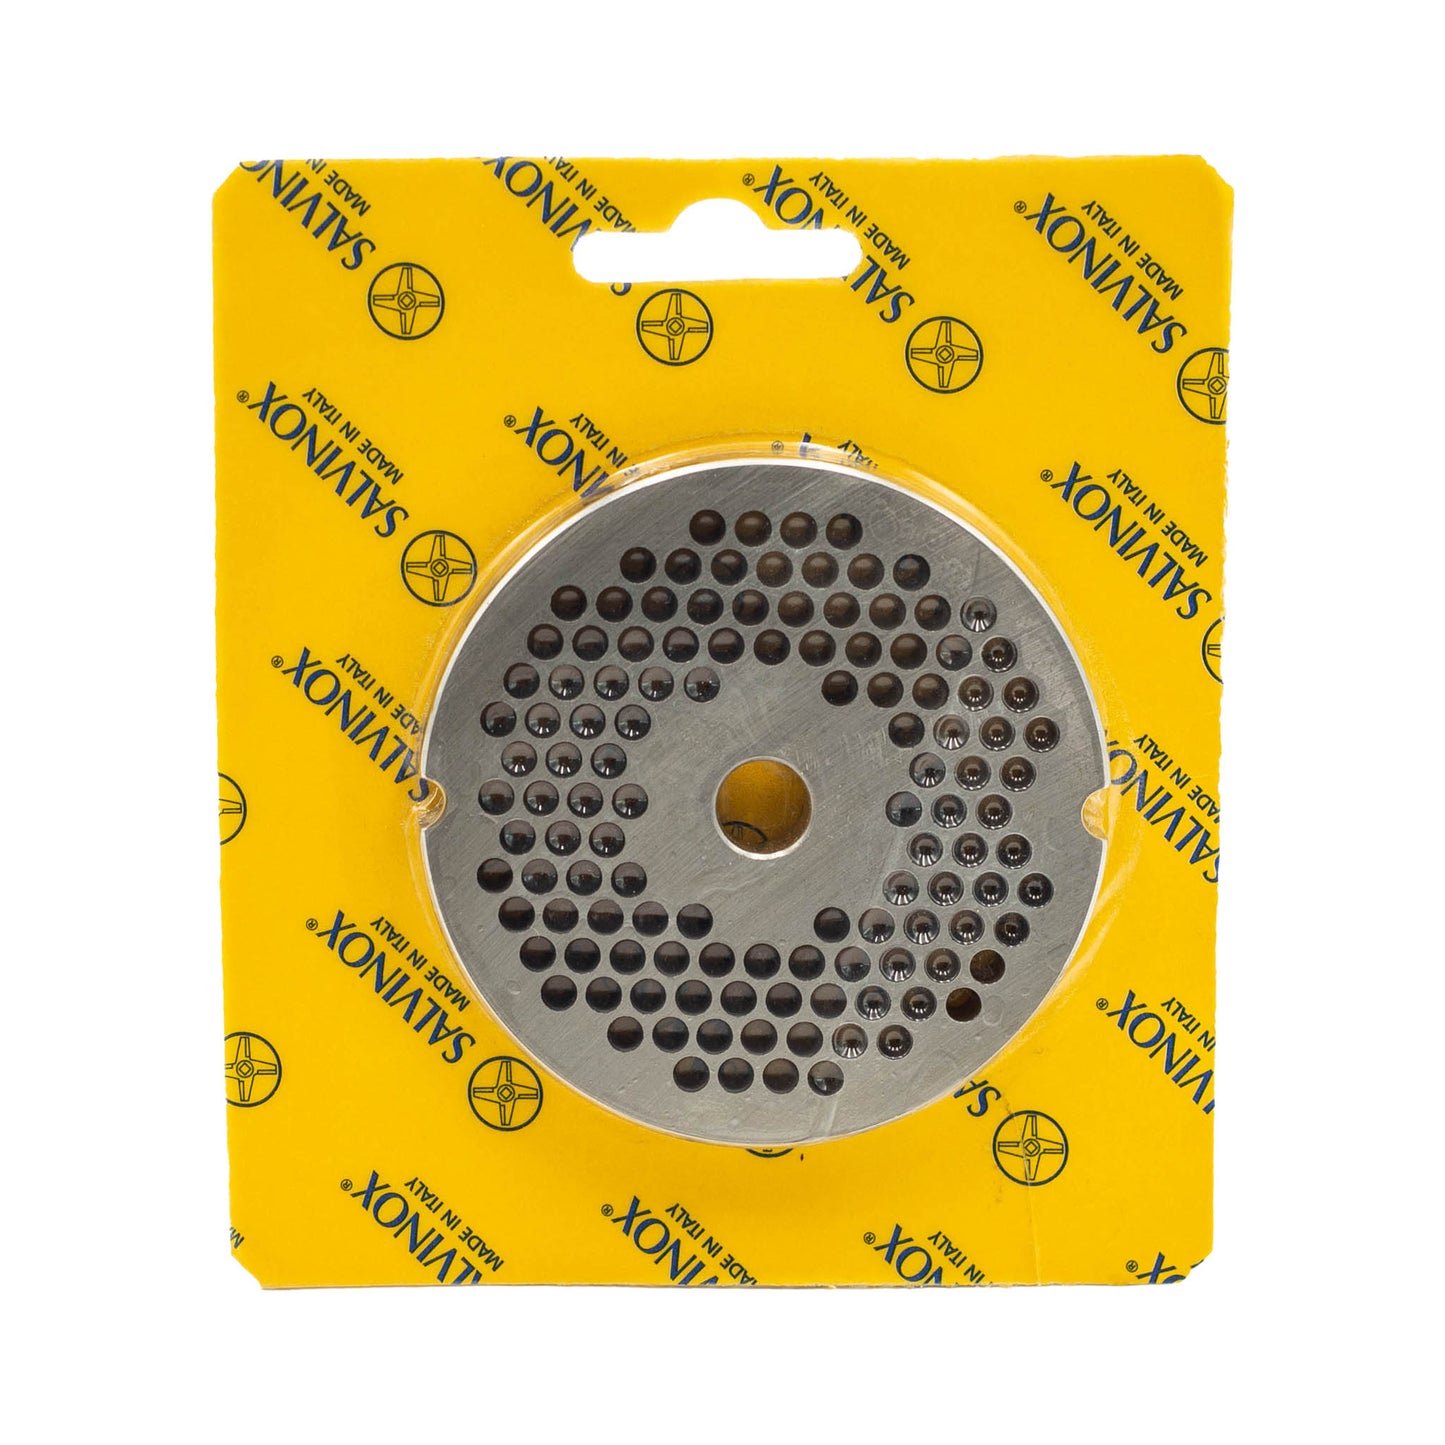 Size 22 with 4.5mm holes stainless steel replacement mincer plate for salami and sausage mincing machines. 